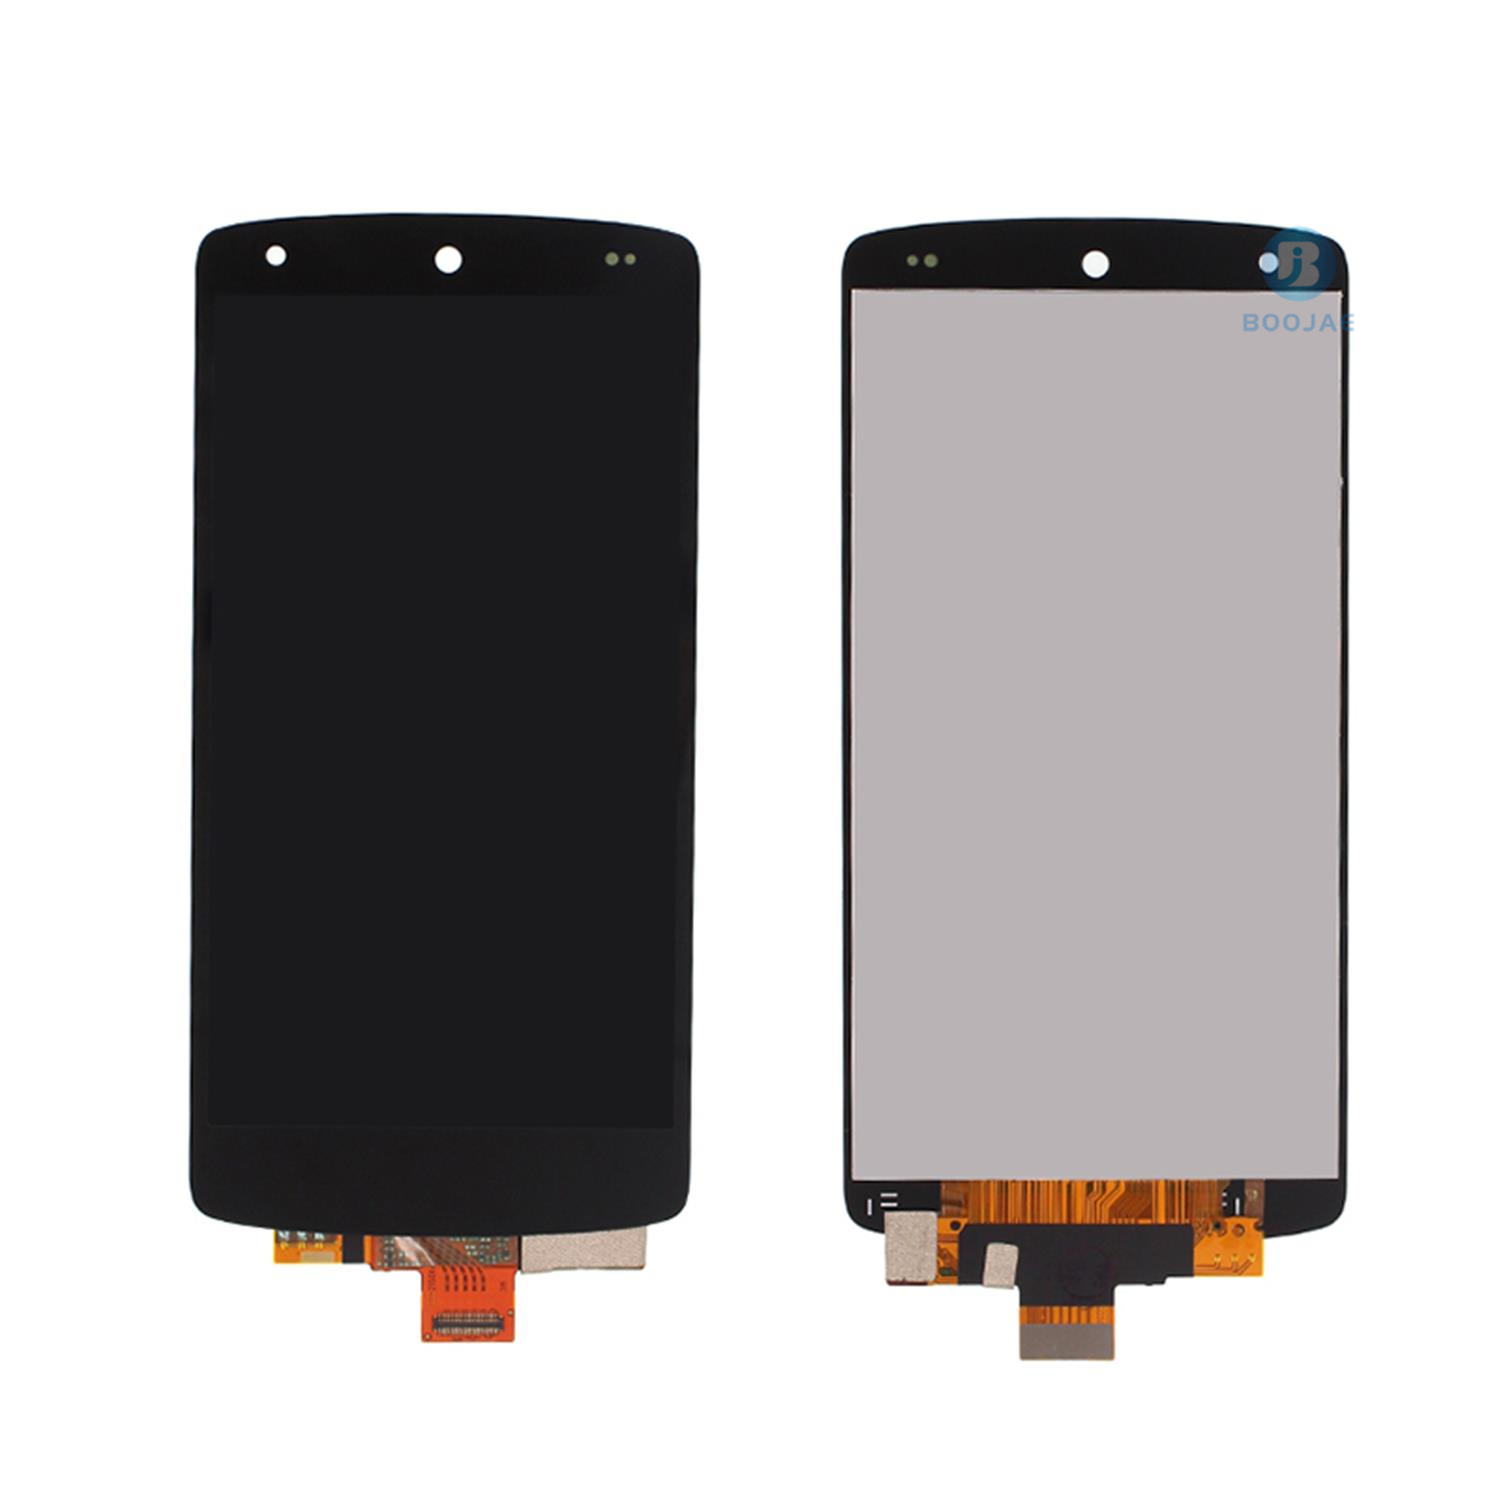 LG Nexus 5 LCD Screen Display, Lcd Assembly Replacement